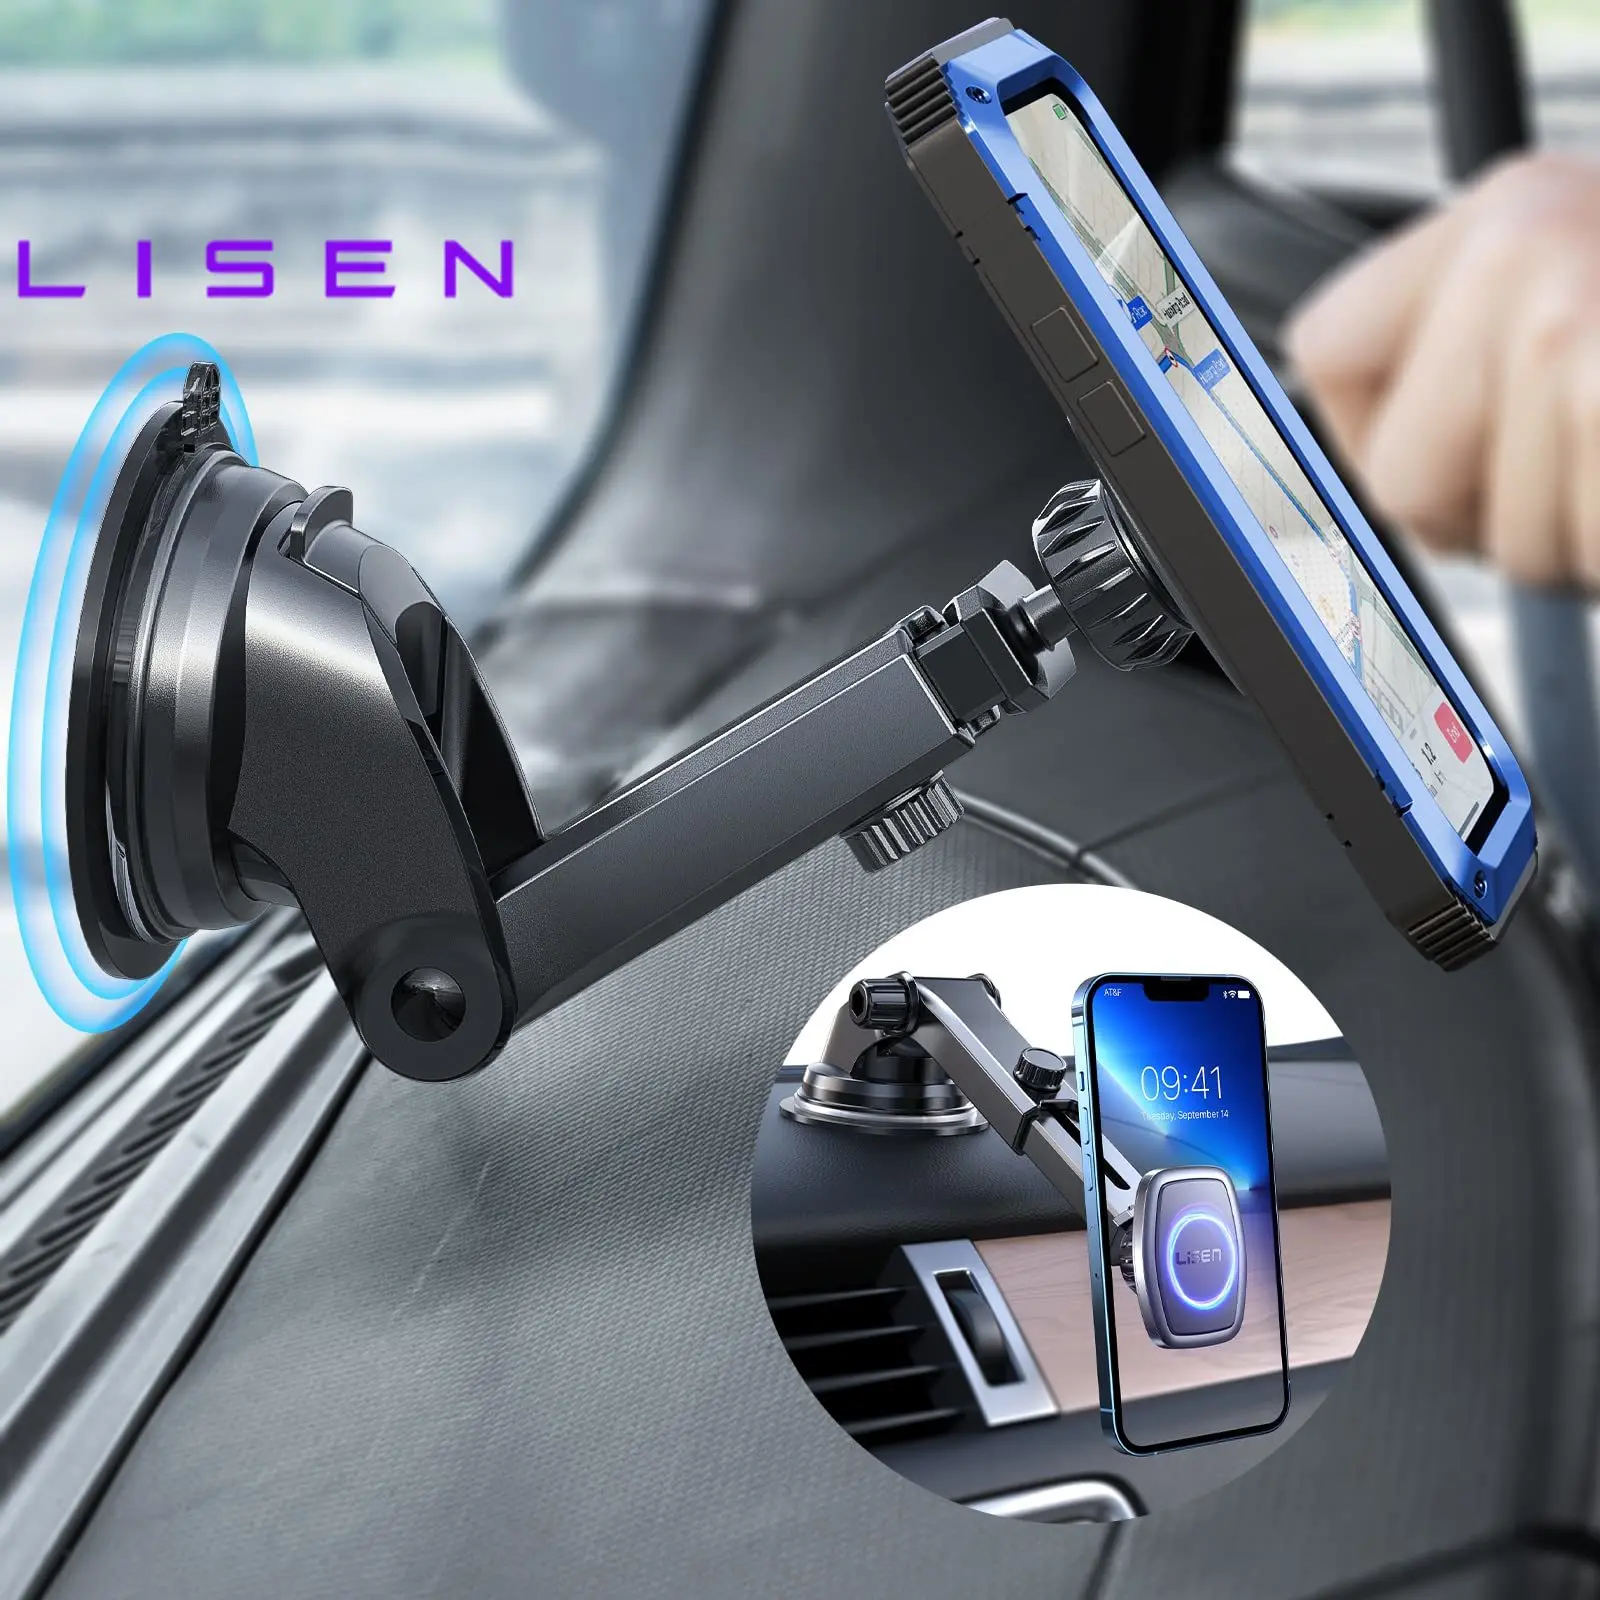 

LISEN Magnetic Phone Holder for Car Mount Universal Dashboard Windshield Magnet Phone Mount for Cell Phone & All Tablets